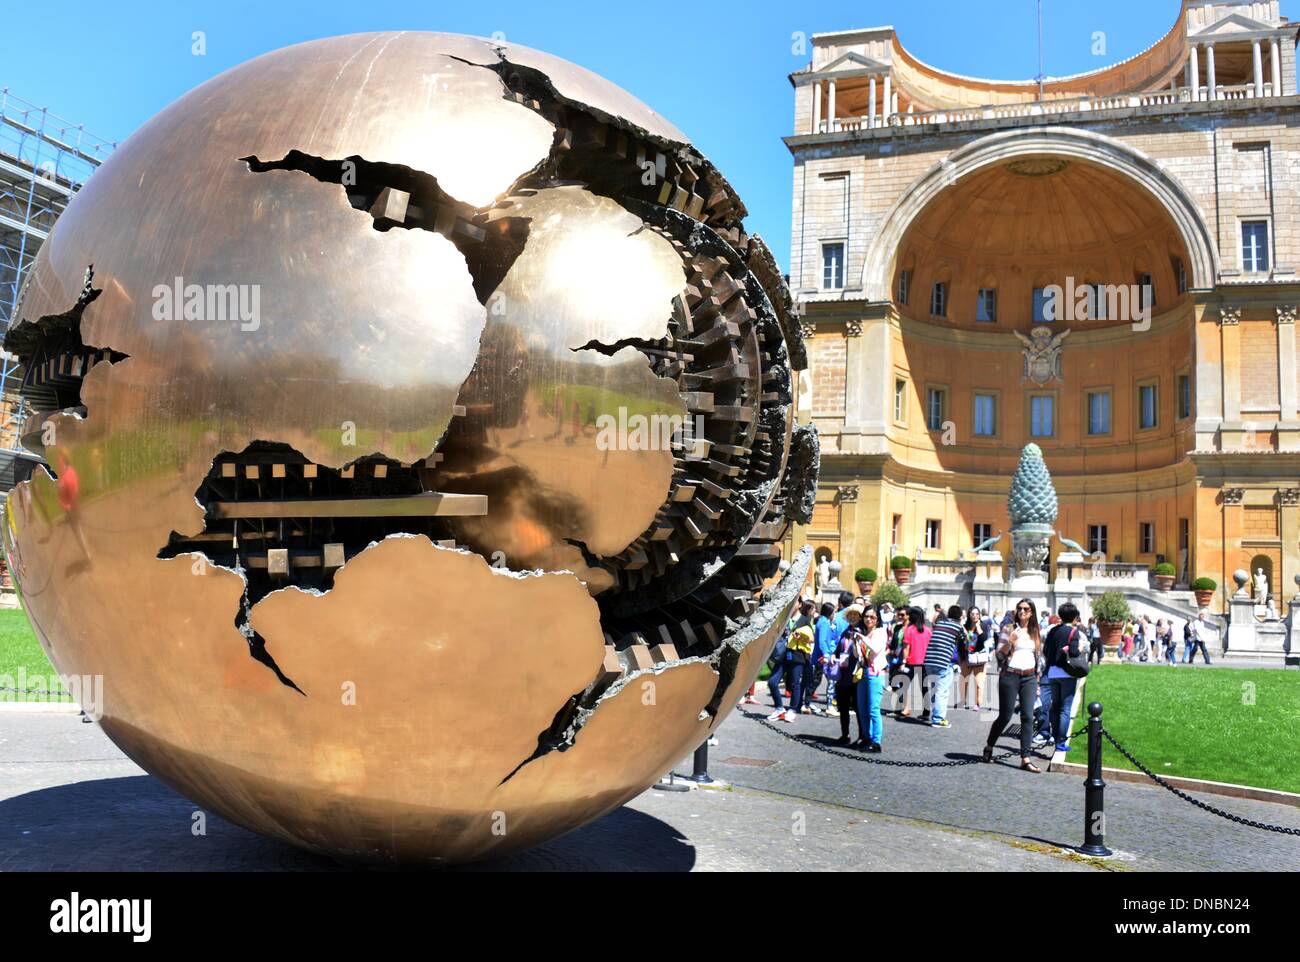 The pine court of the Vatican Museums is pictured in Rome, Italy, 13 May  2013. The golden ball 'Sfera con Sfera' made by Arnoldo Pomodoro in 1990 is  pictured in the foreground.